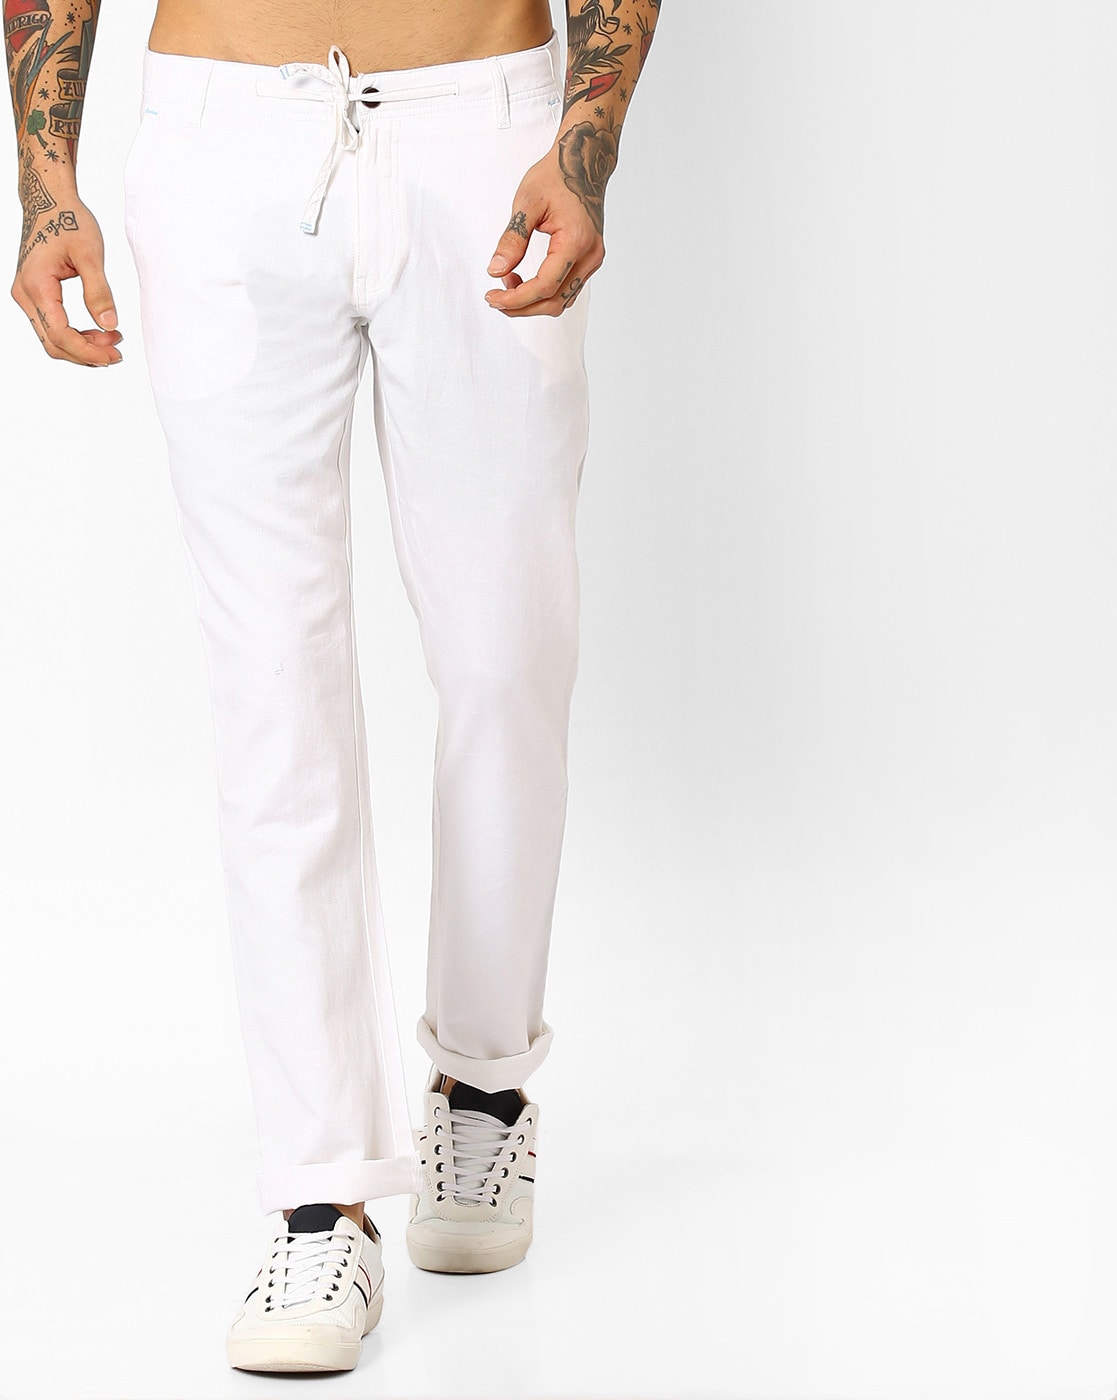 Buy American Noti White Chinos for Men Stretchable Trousers for Men  Slim  fit Pants for Men  Chinos Pants for Mens  Cotton Chinos for Men Online at  Low Prices in